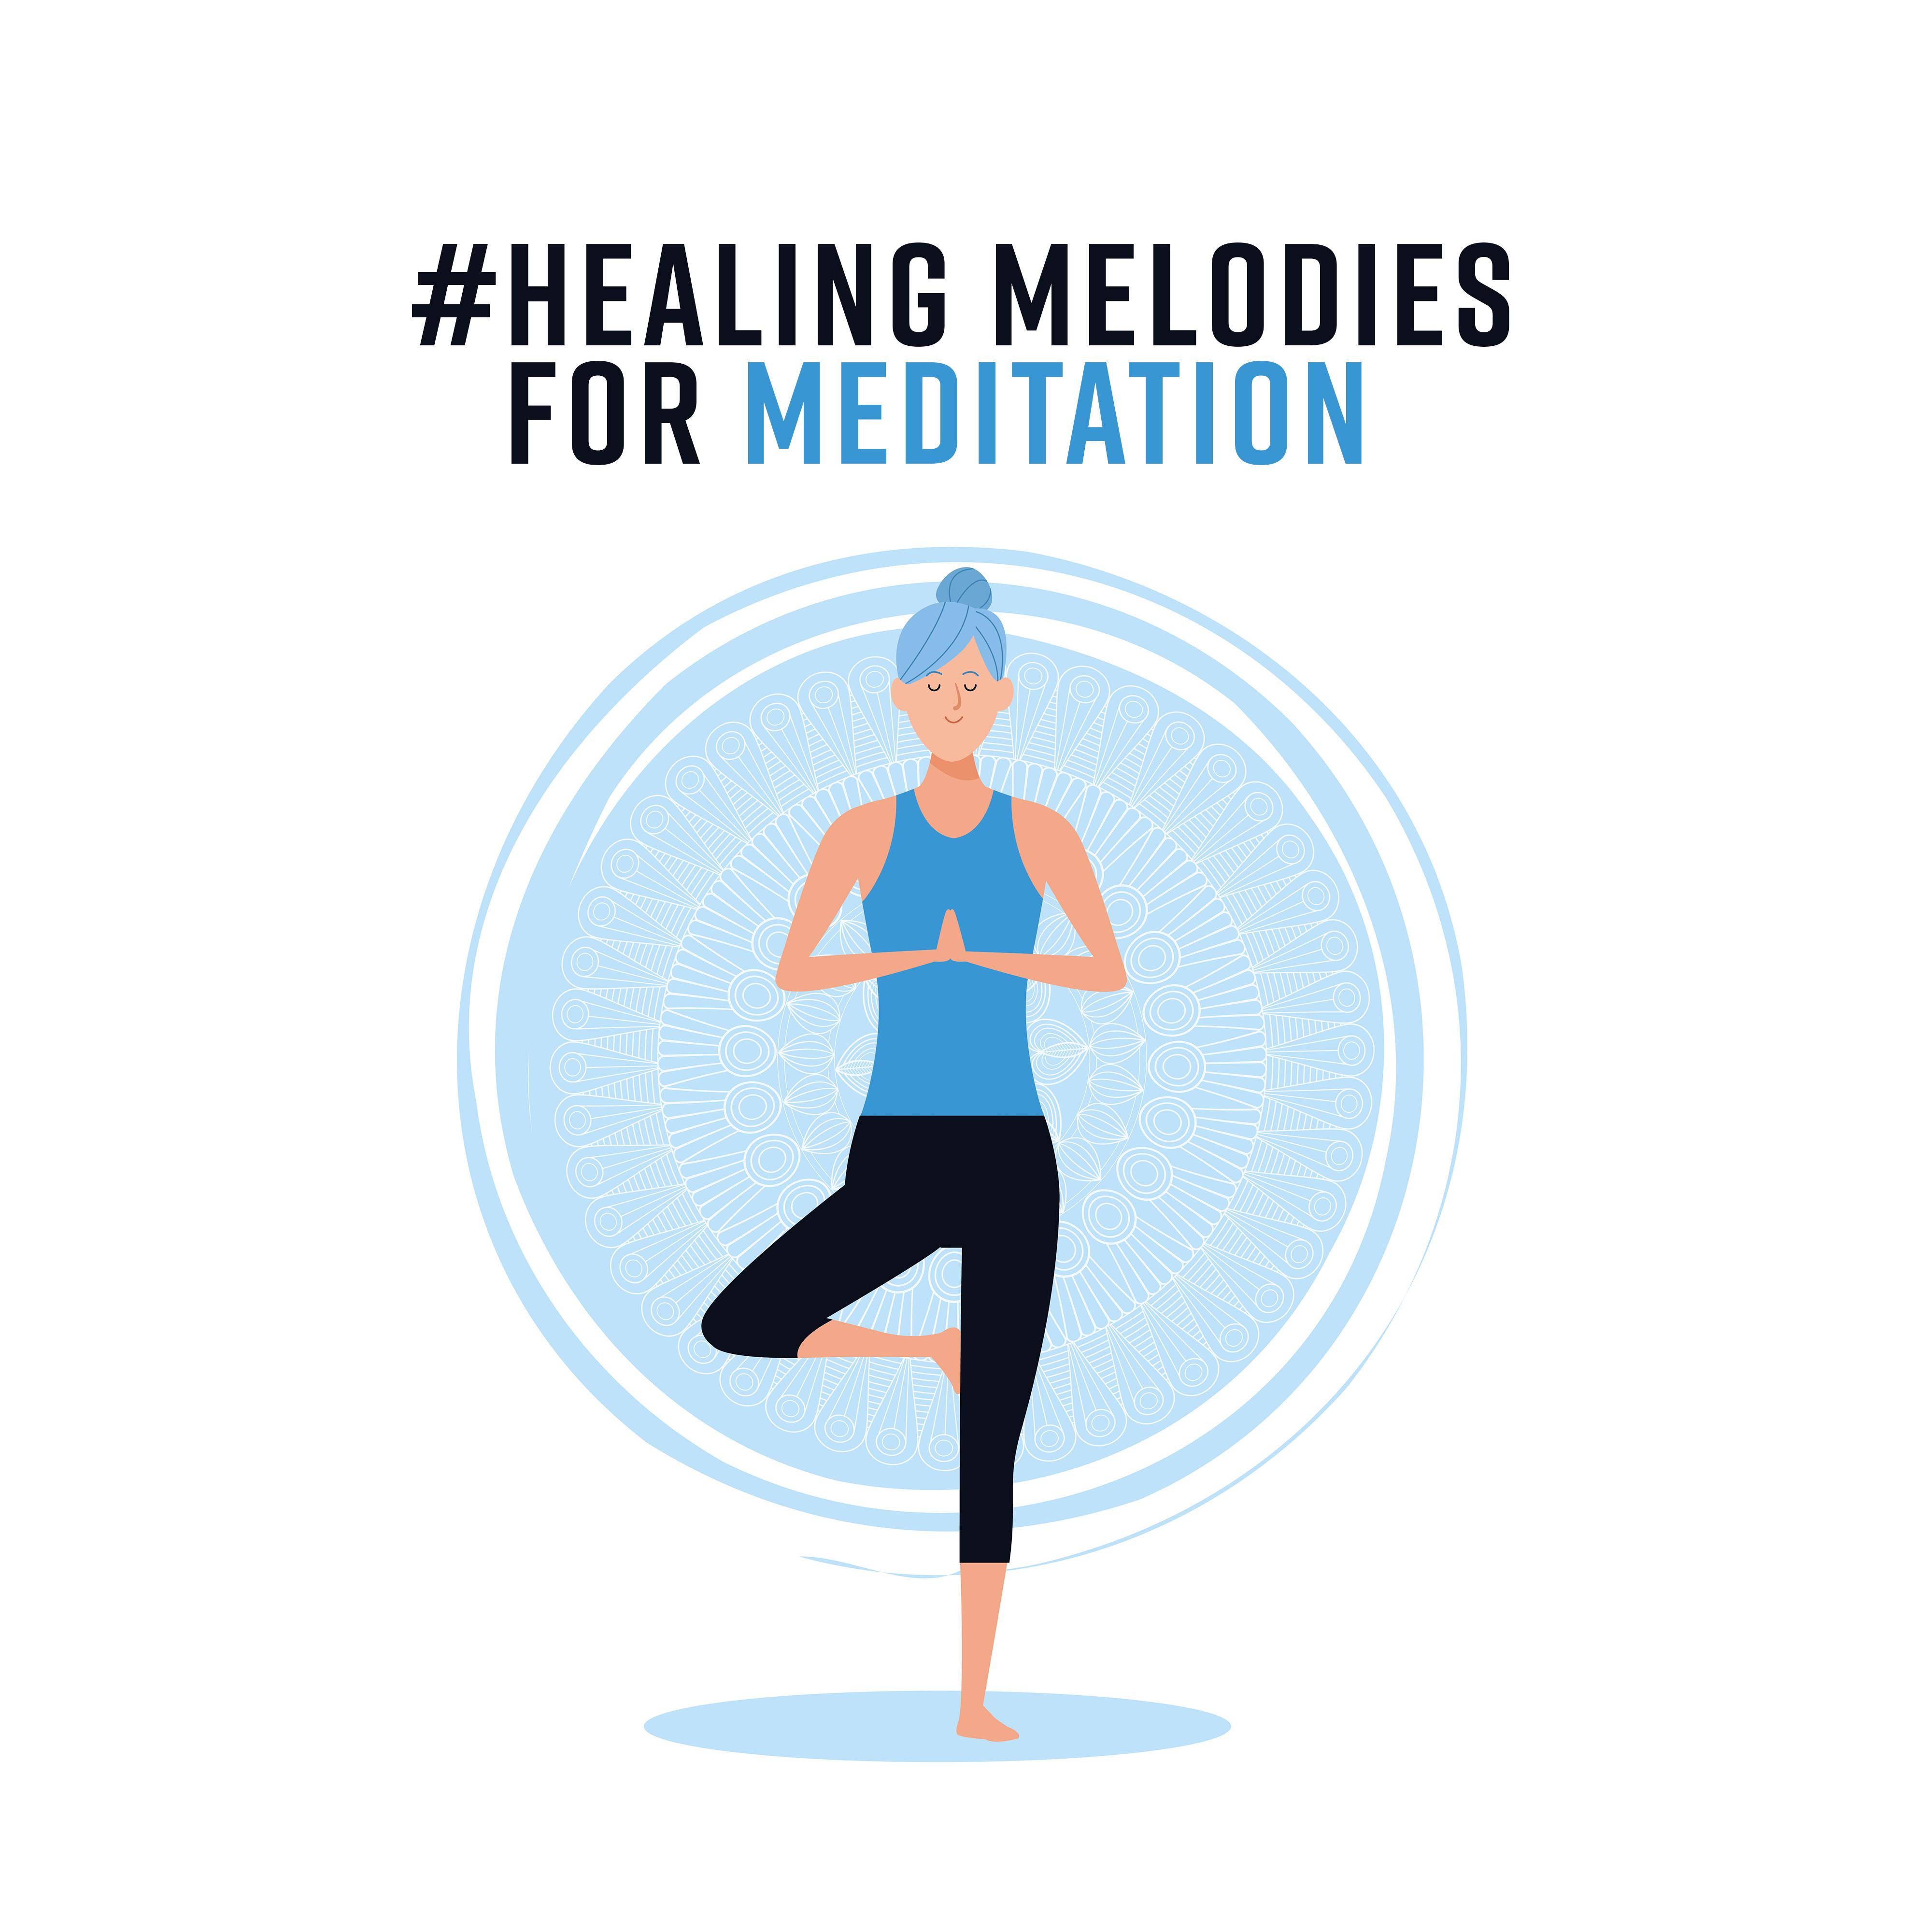 #Healing Melodies for Meditation